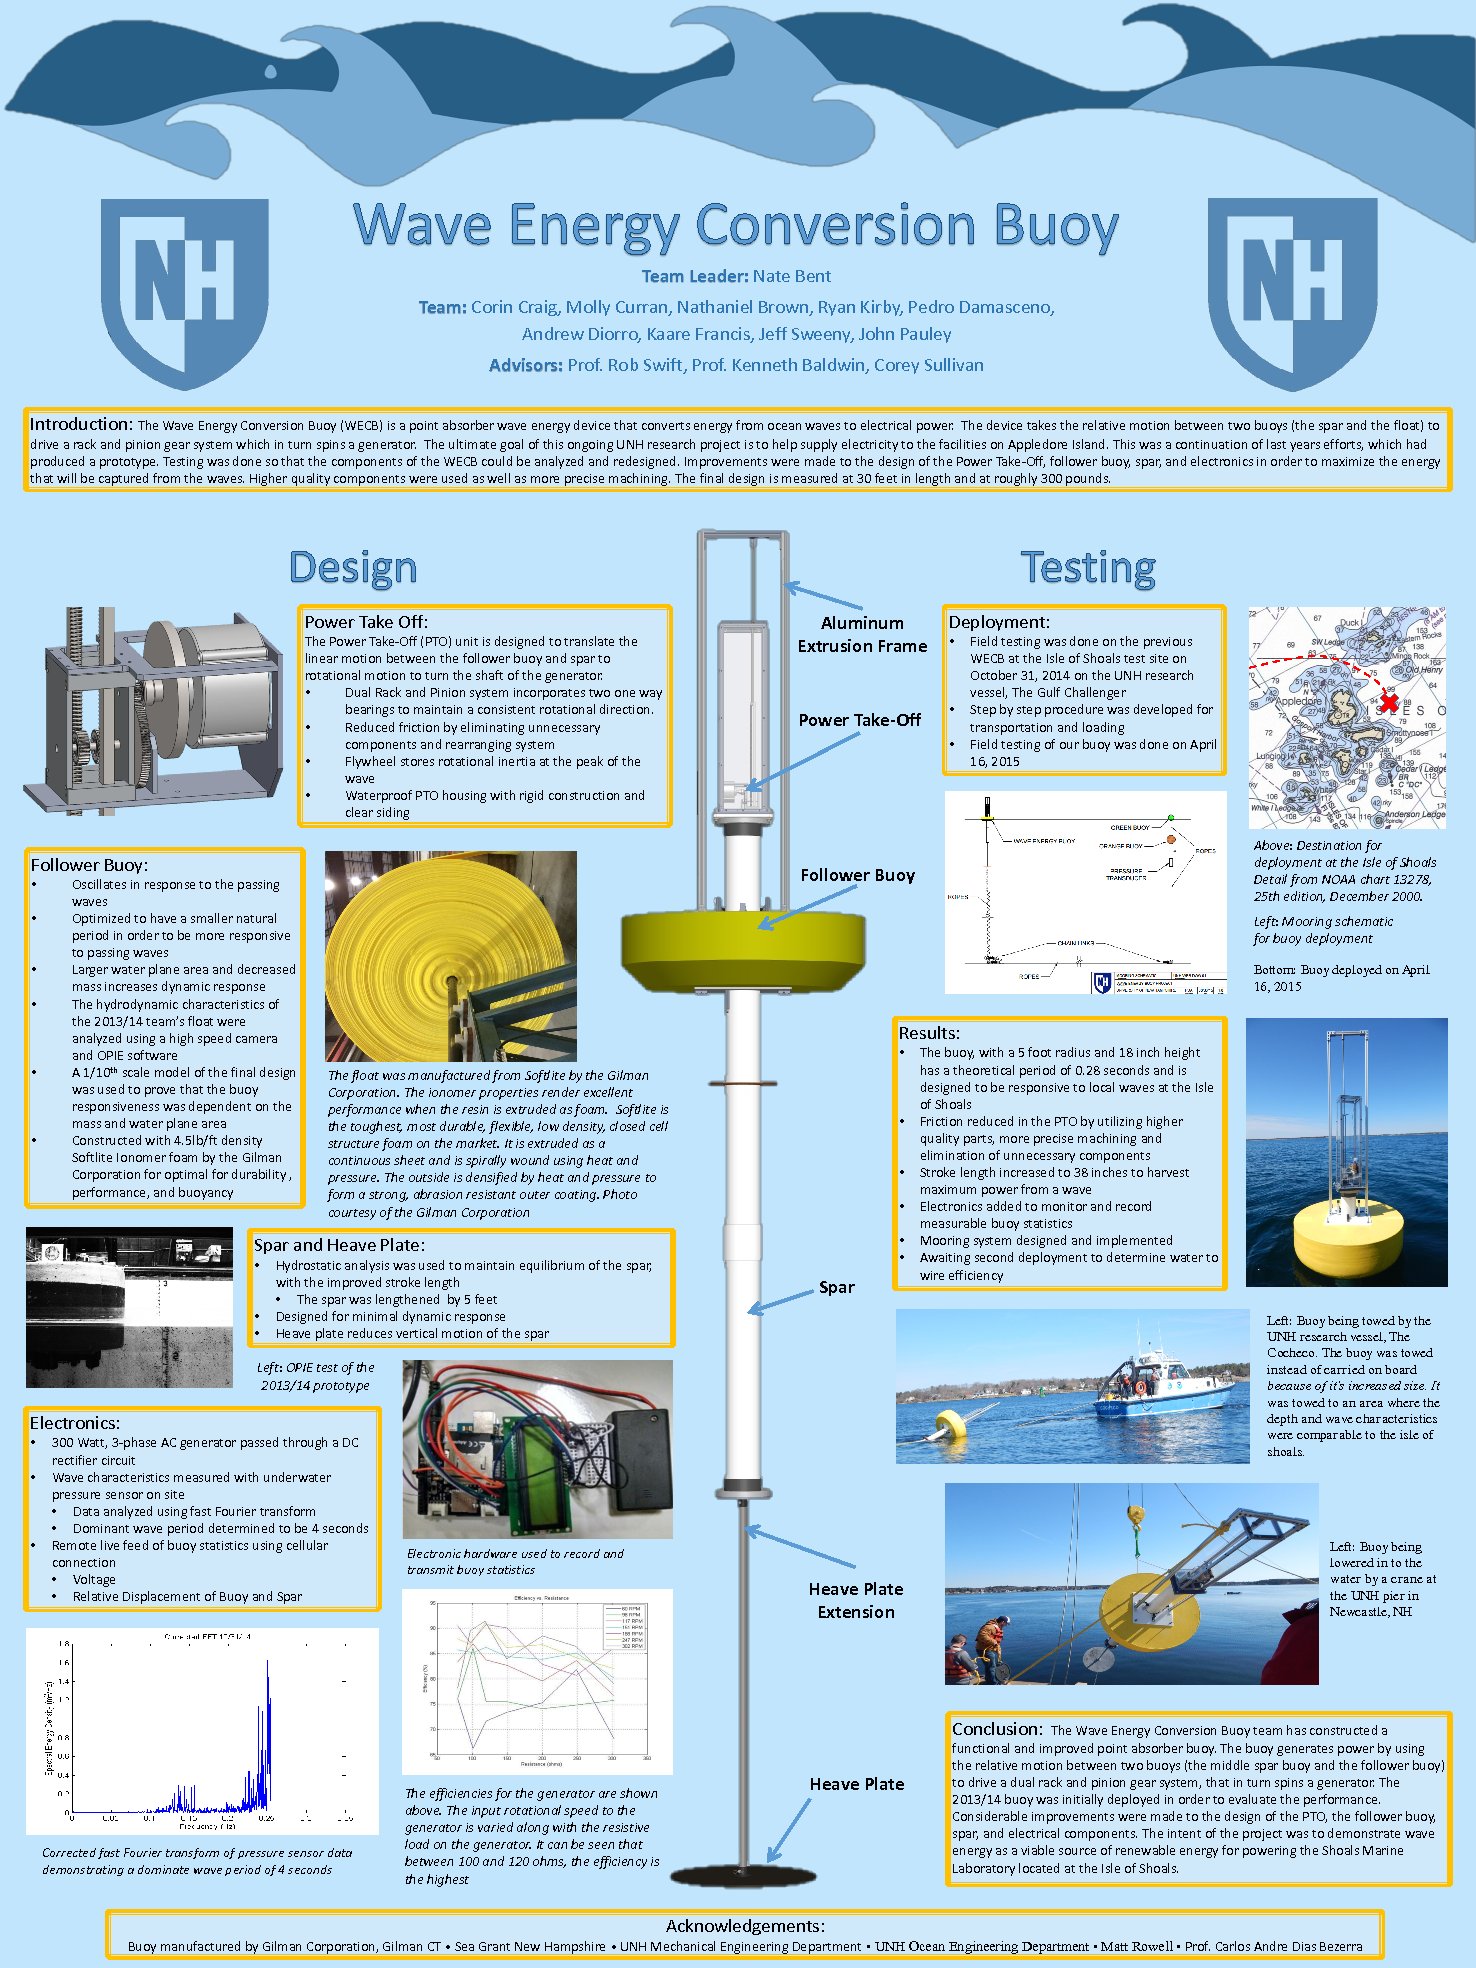 Wave Energy Conversion Buoy by kcc35